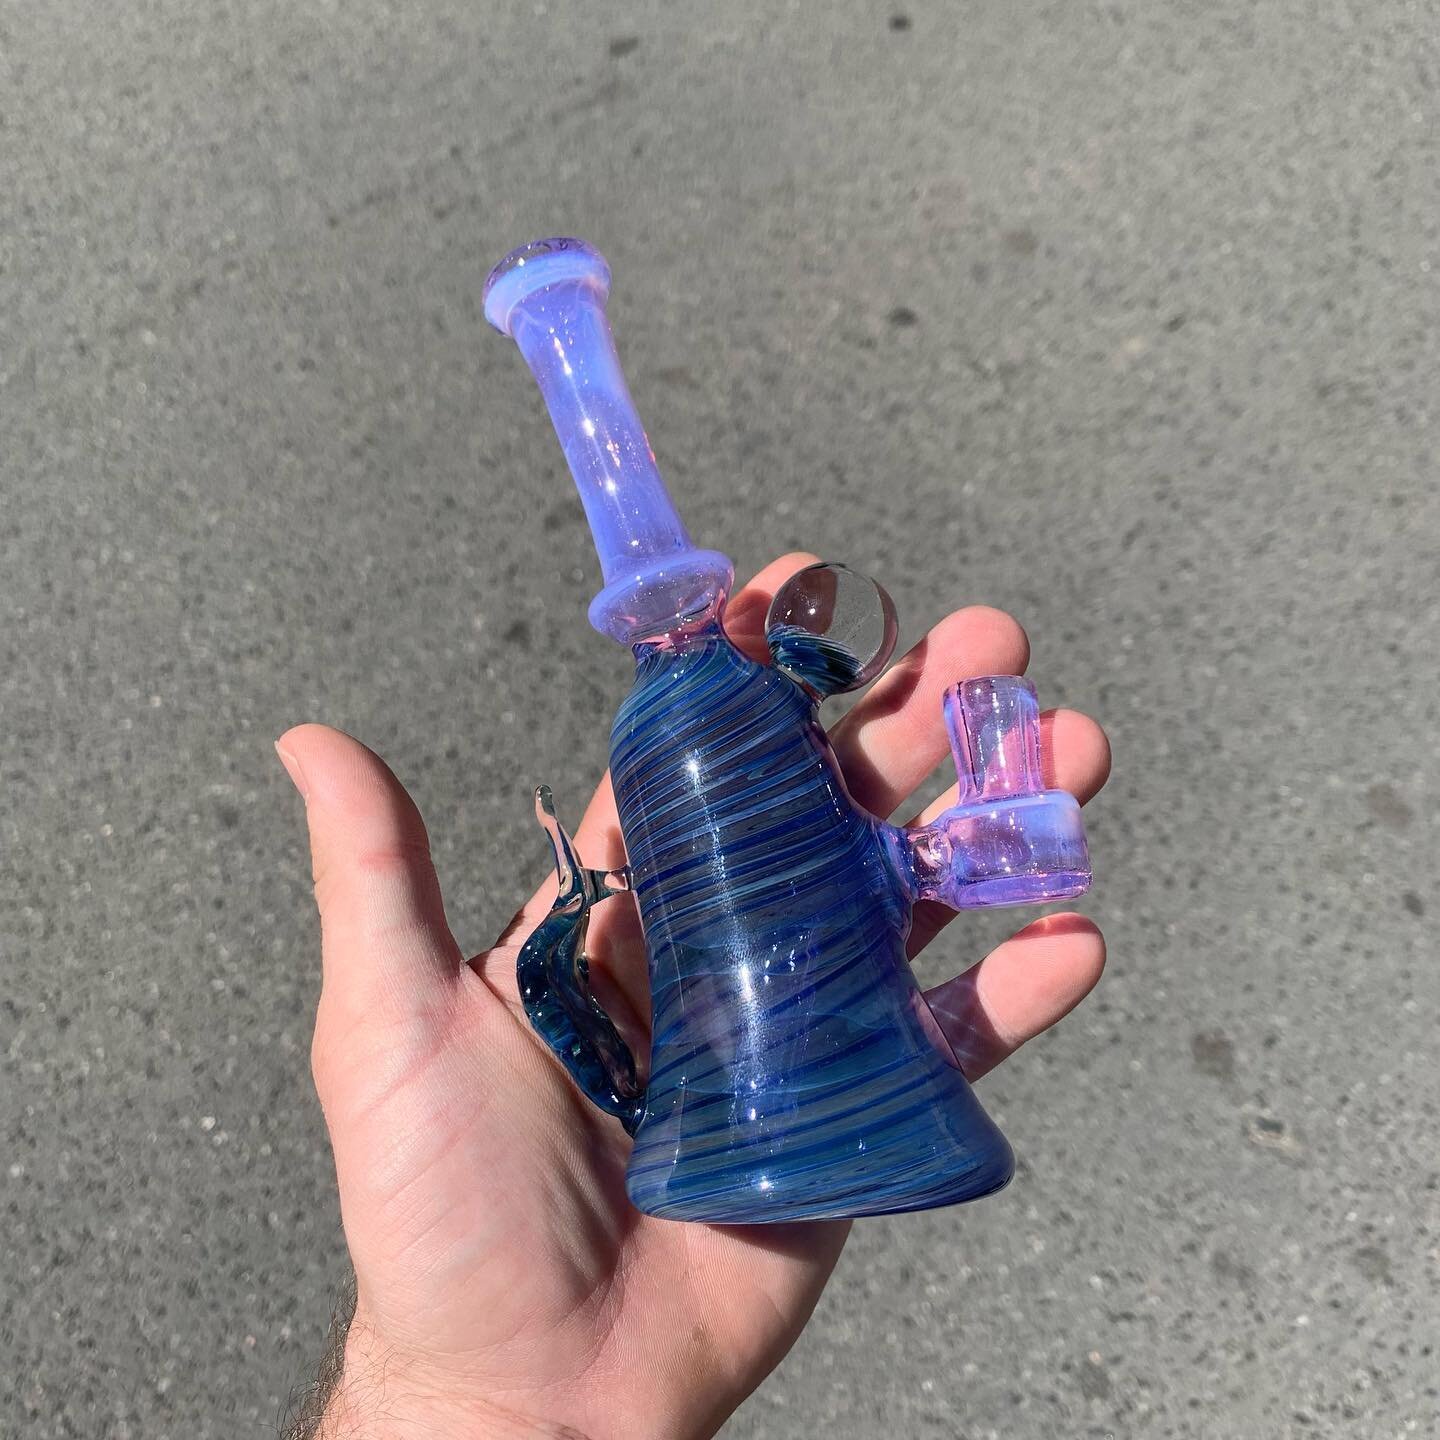 SOLD Banger hanger made mixing purple Lilac and blue turquoise. The marble on top keeps the barycentre stable.

High 18 cm
10 mm joint
2 holes percolator

#&rsquo;22/30

__________________________________________________

#hashba_glass #headyglass #b